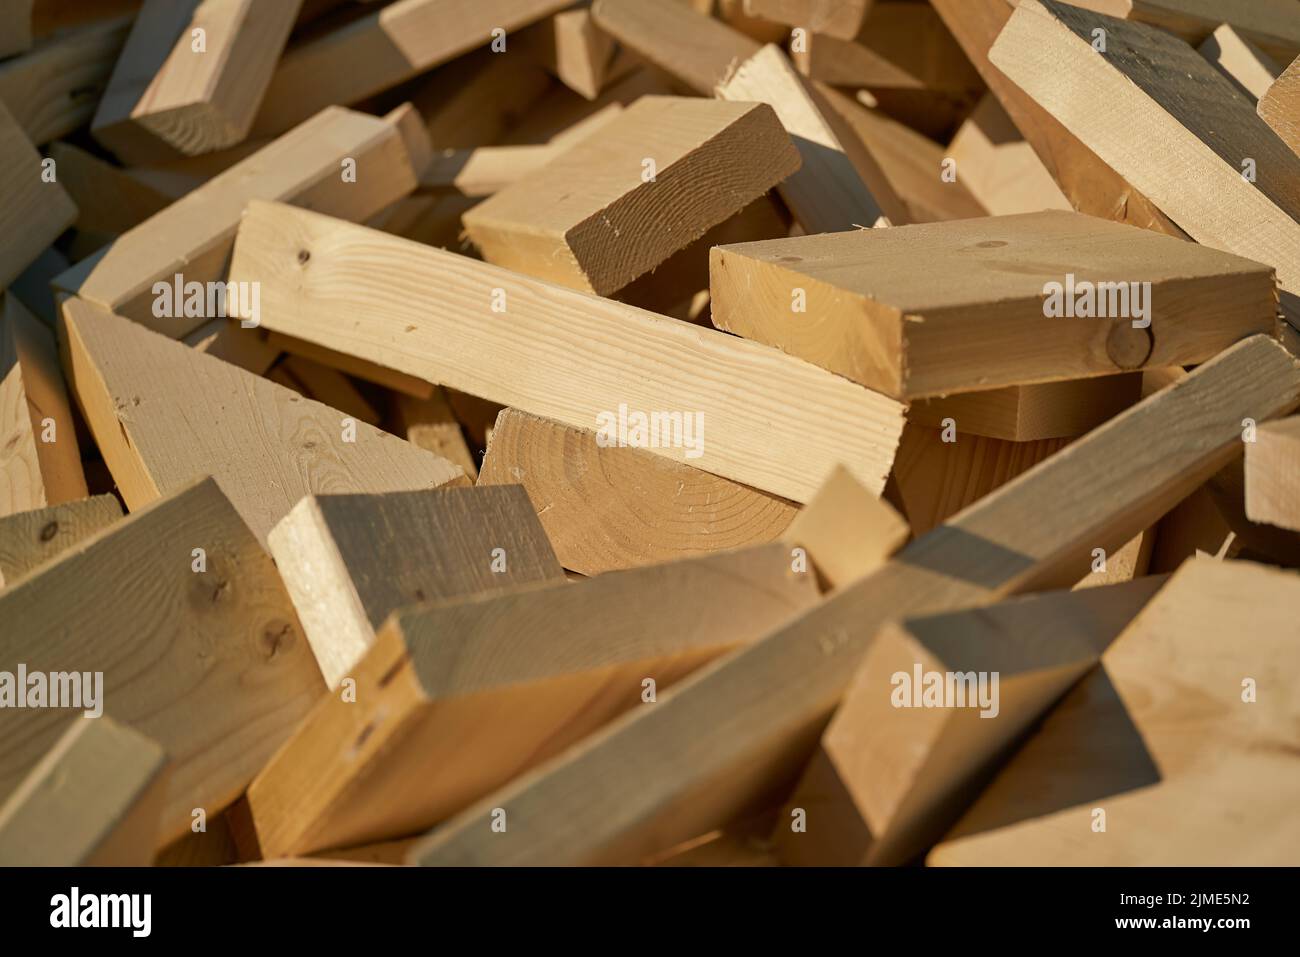 Remains of building material made of wood on the storage yard for processing in a pellet plant Stock Photo